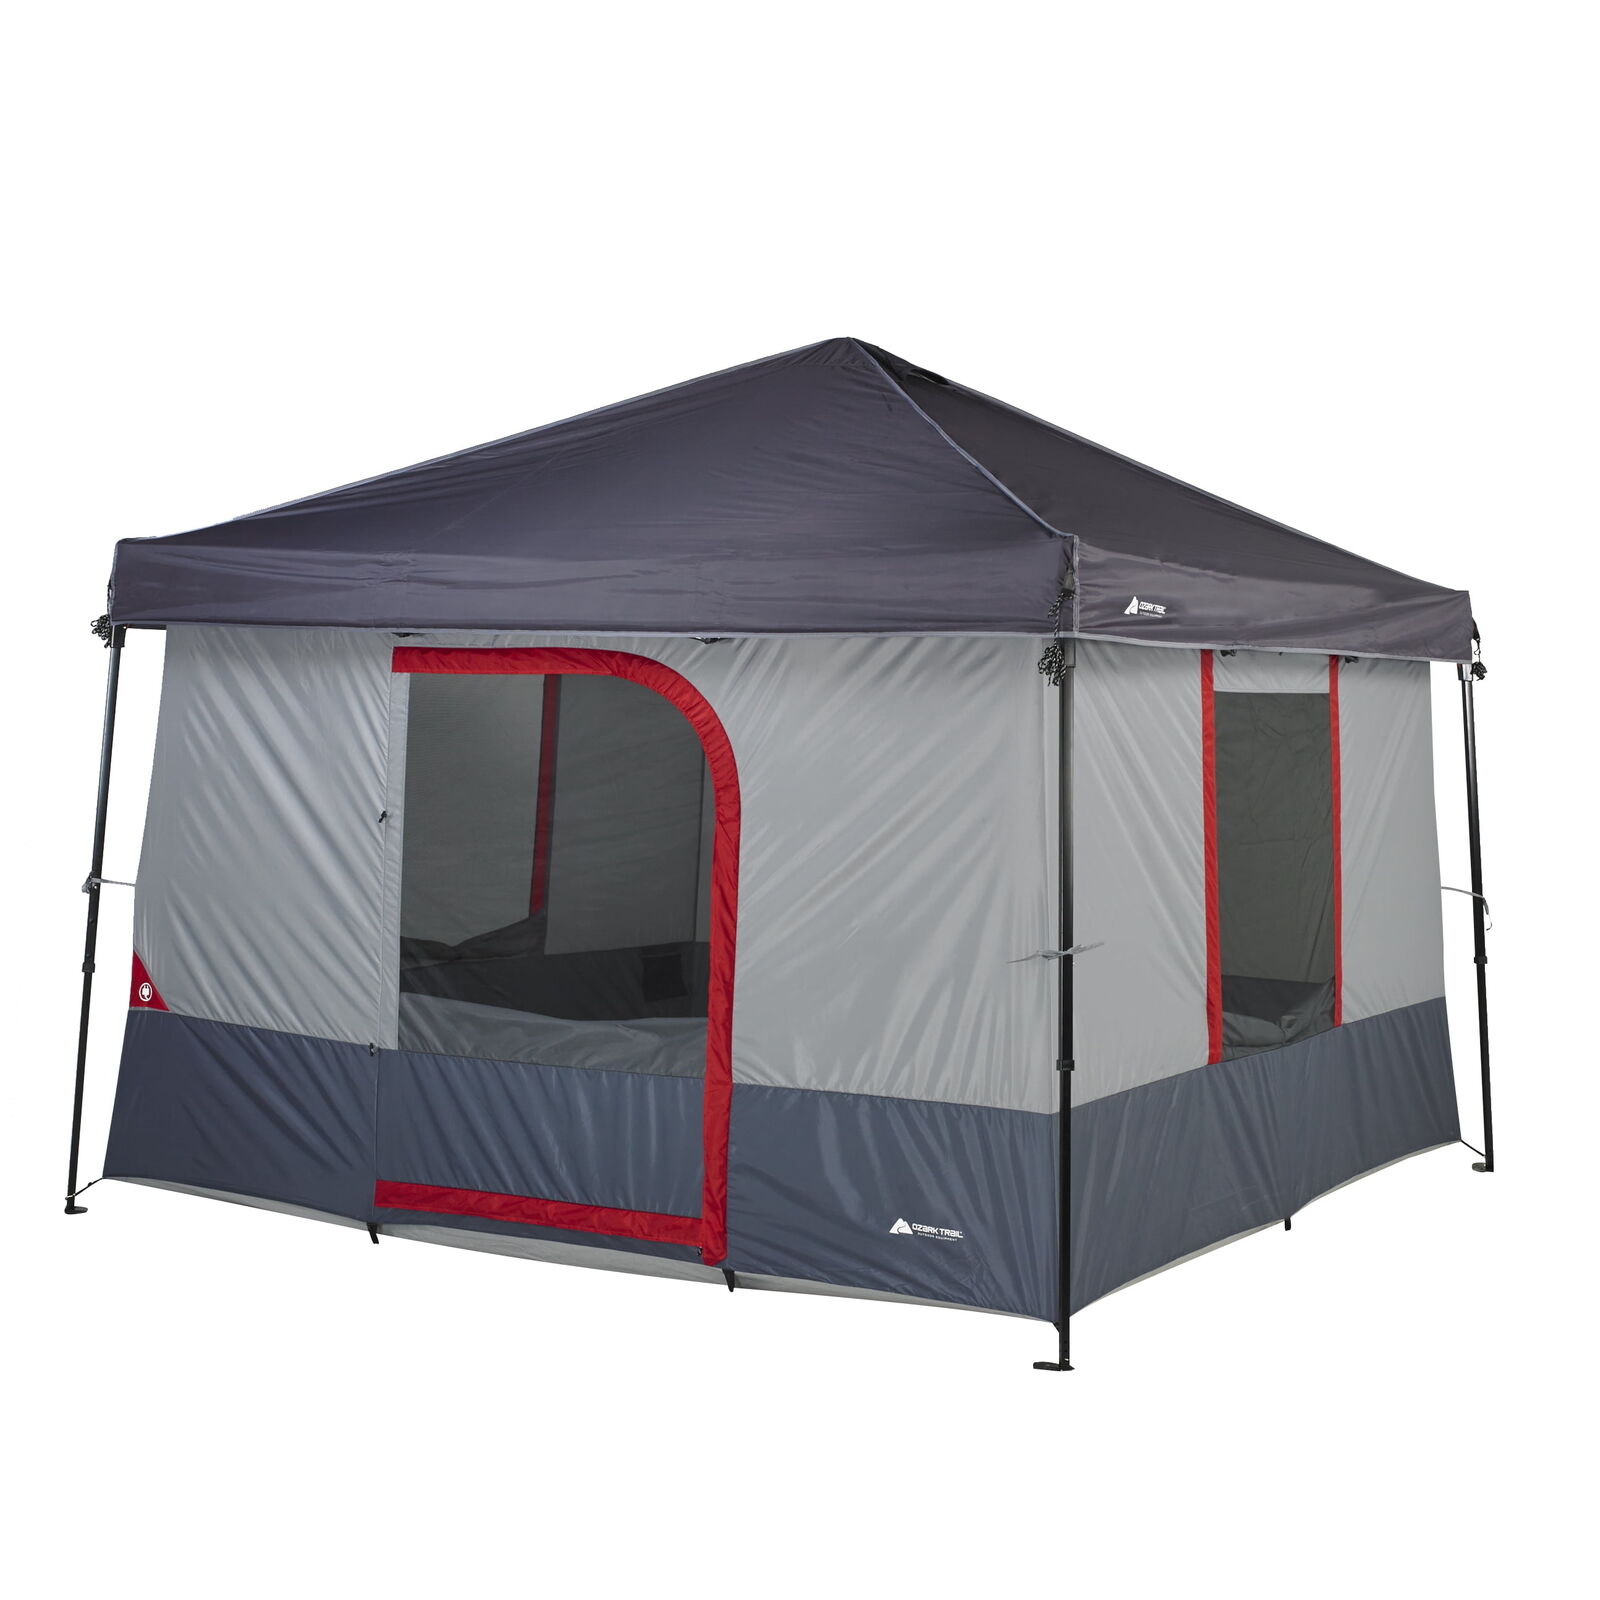 ConnecTent 6-Person Canopy Tent, Straight-Leg Canopy Sold Separately